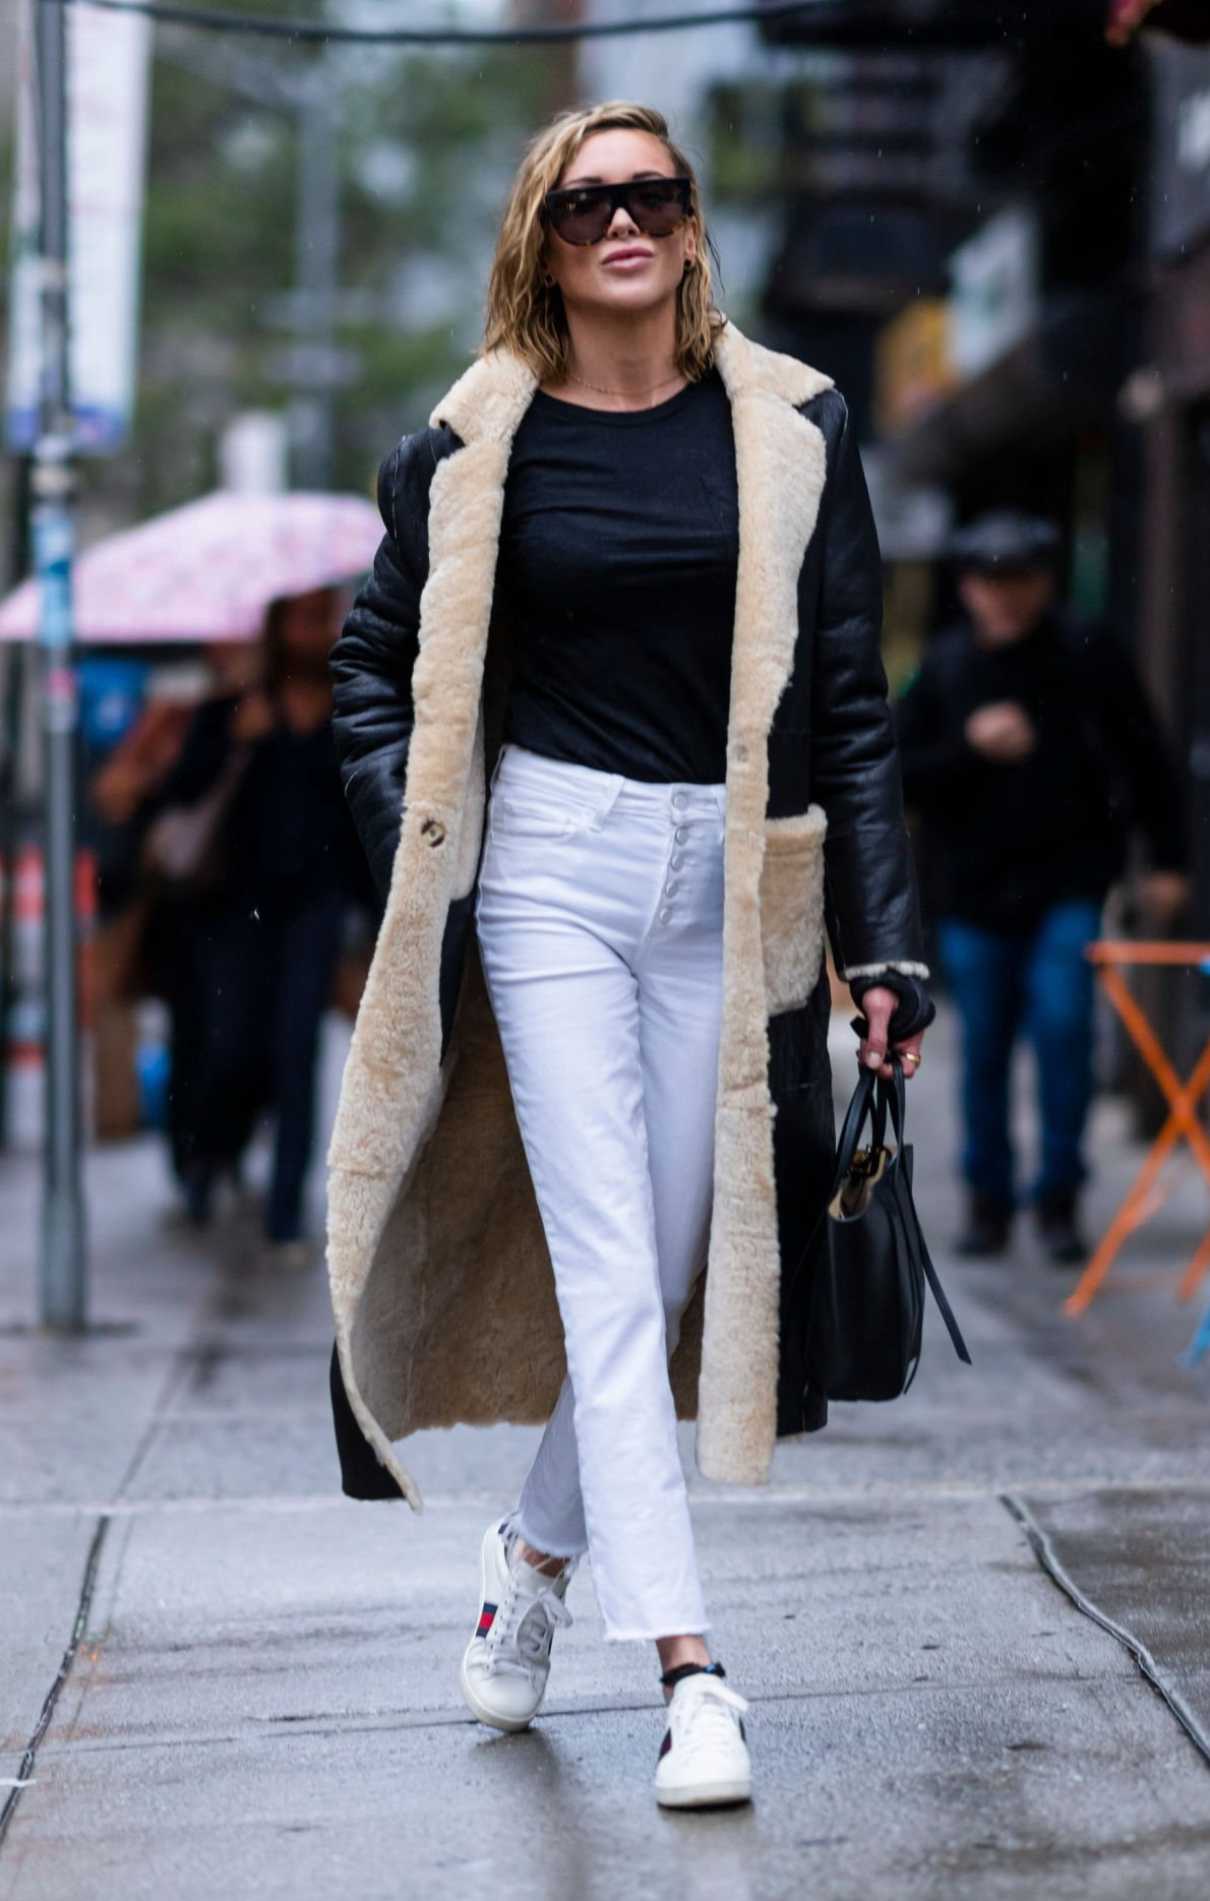 Katie Cassidy in a White Pants